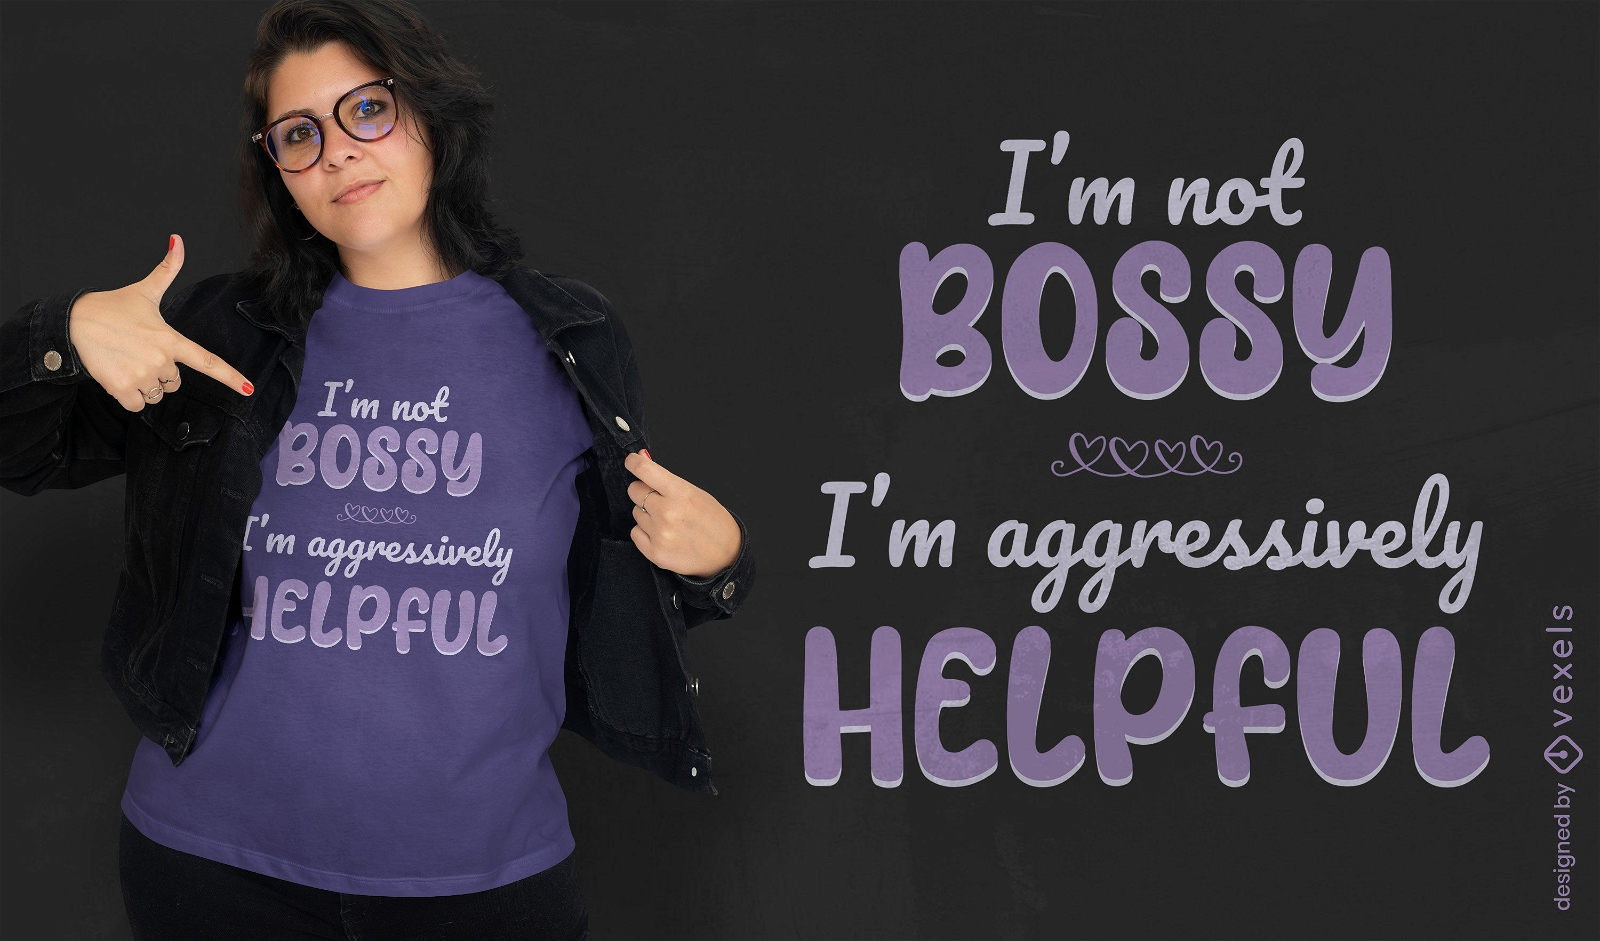 Funny bossy purple quote t-shirt design